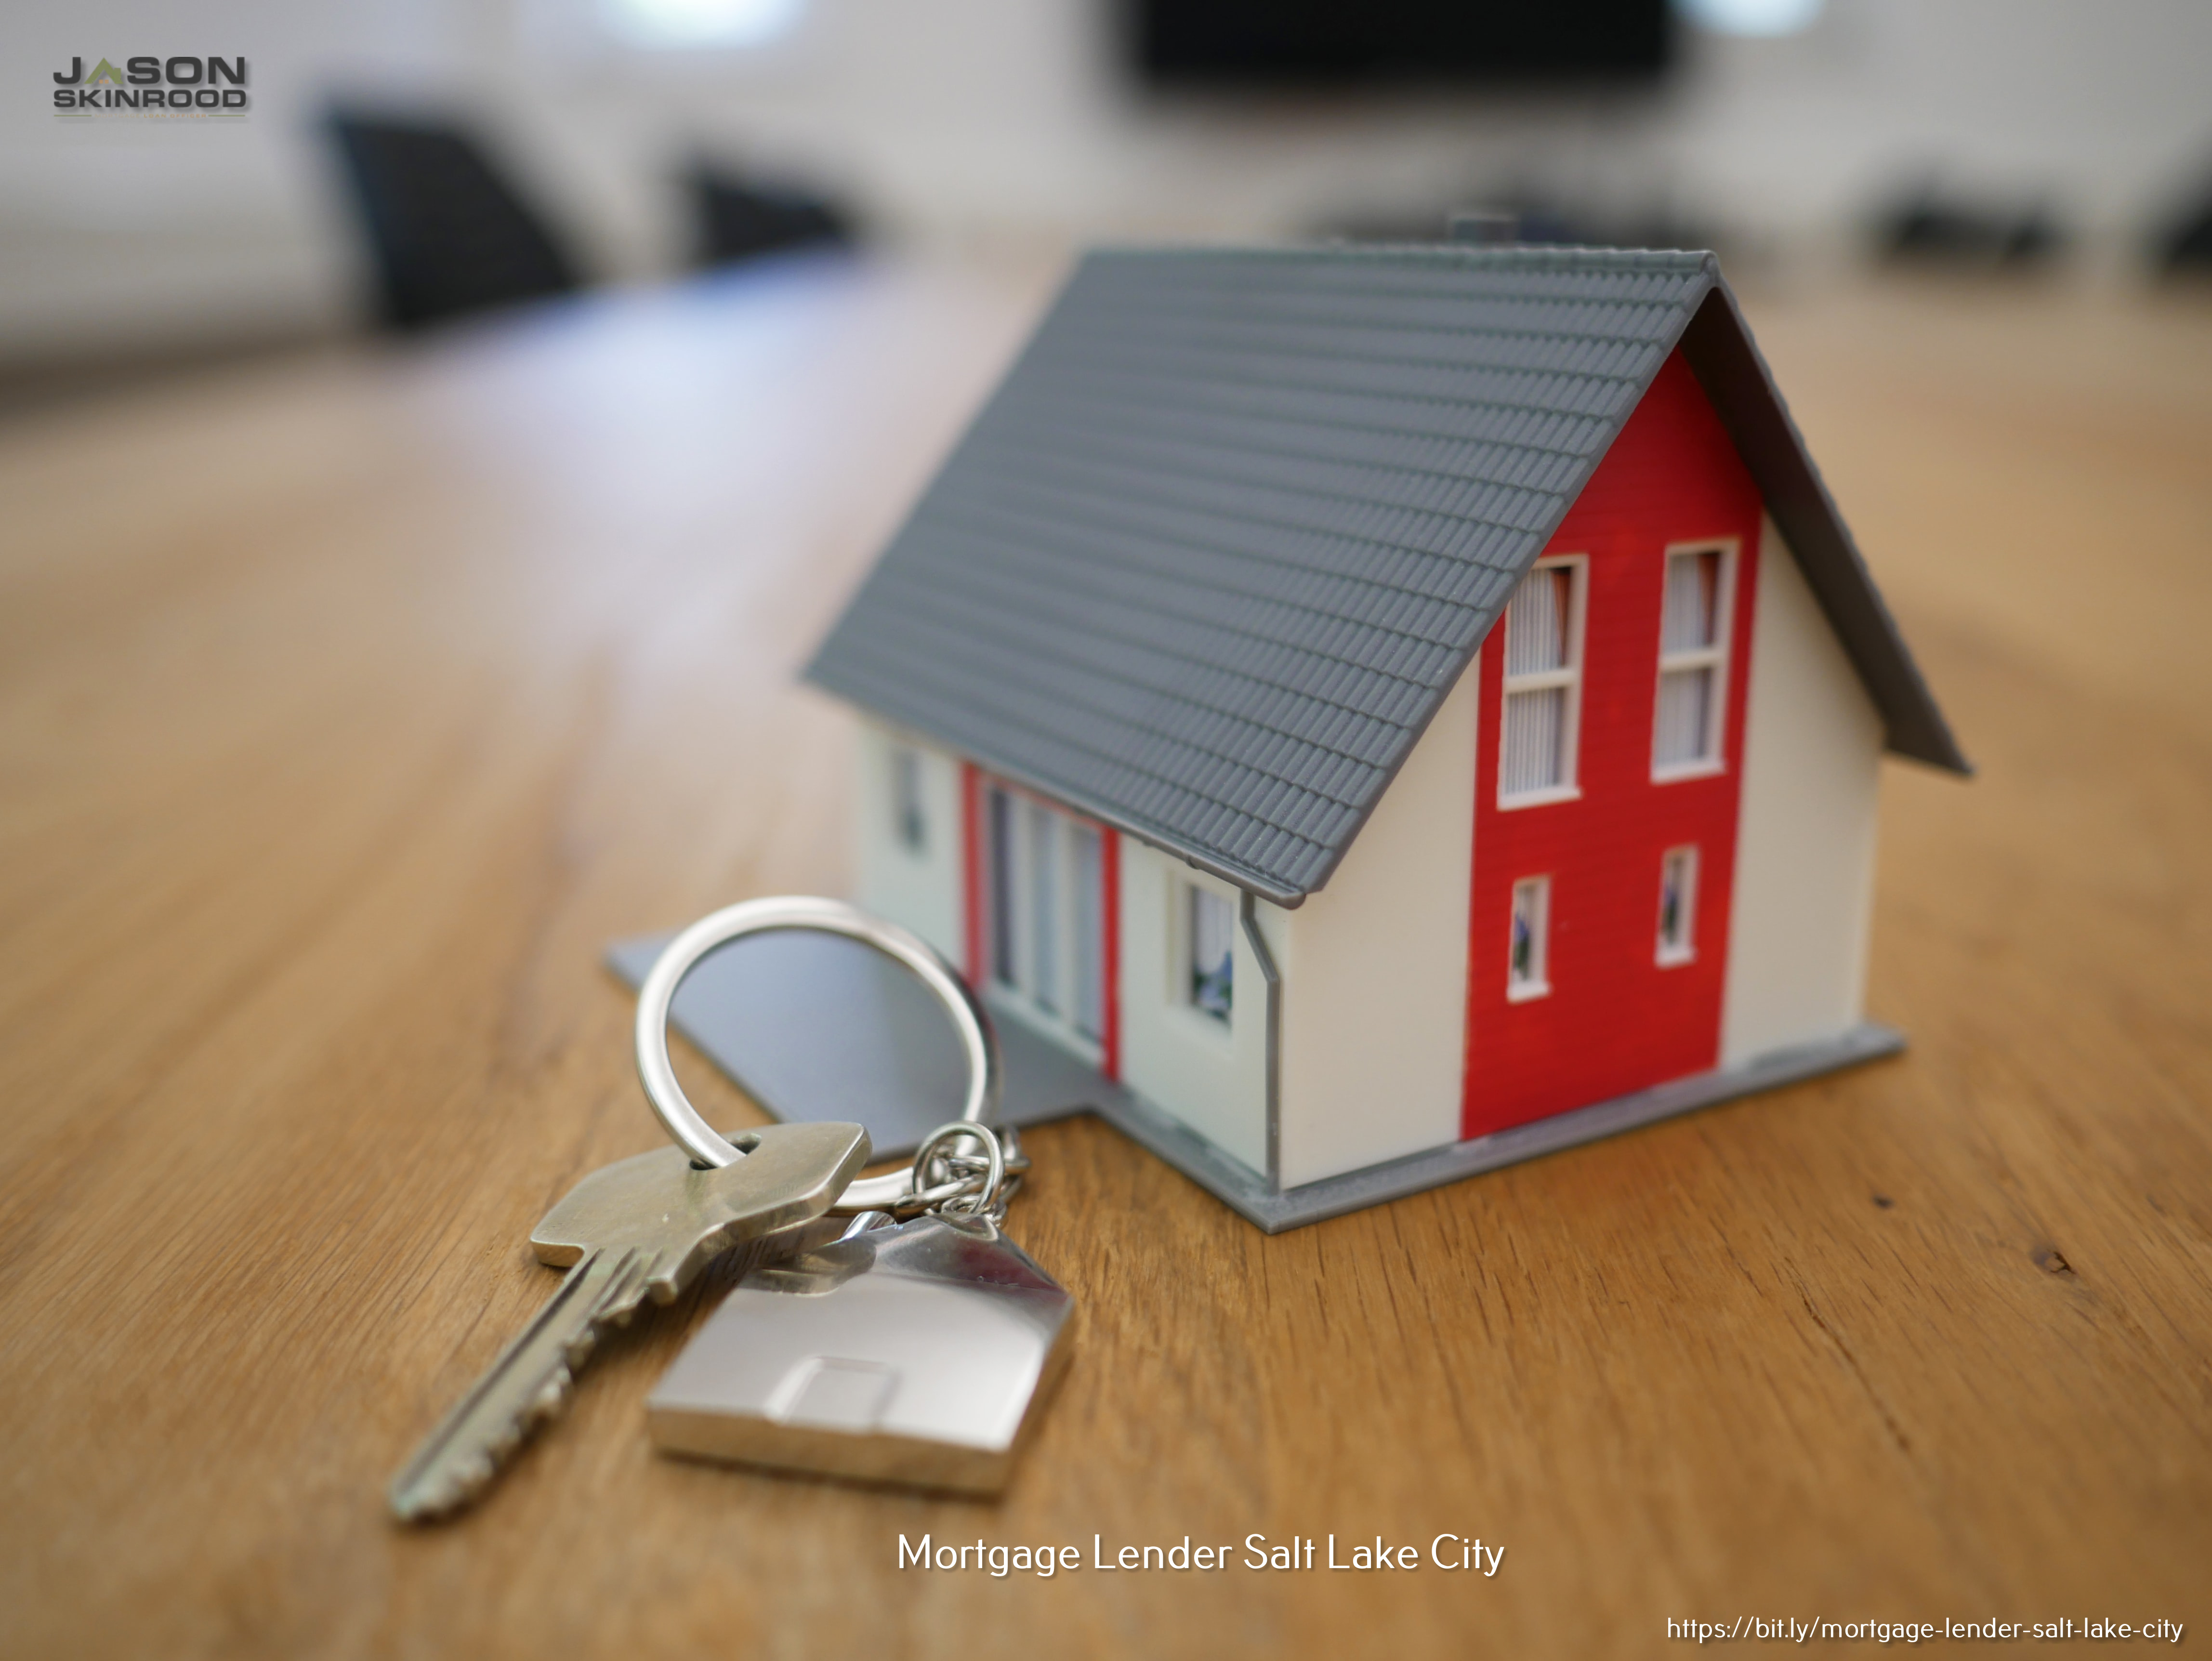 Jason Skinrood - Mortgage Loan Officer Highlights the Benefits of Working with a Trusted Local Mortgage Lender When Buying a Home